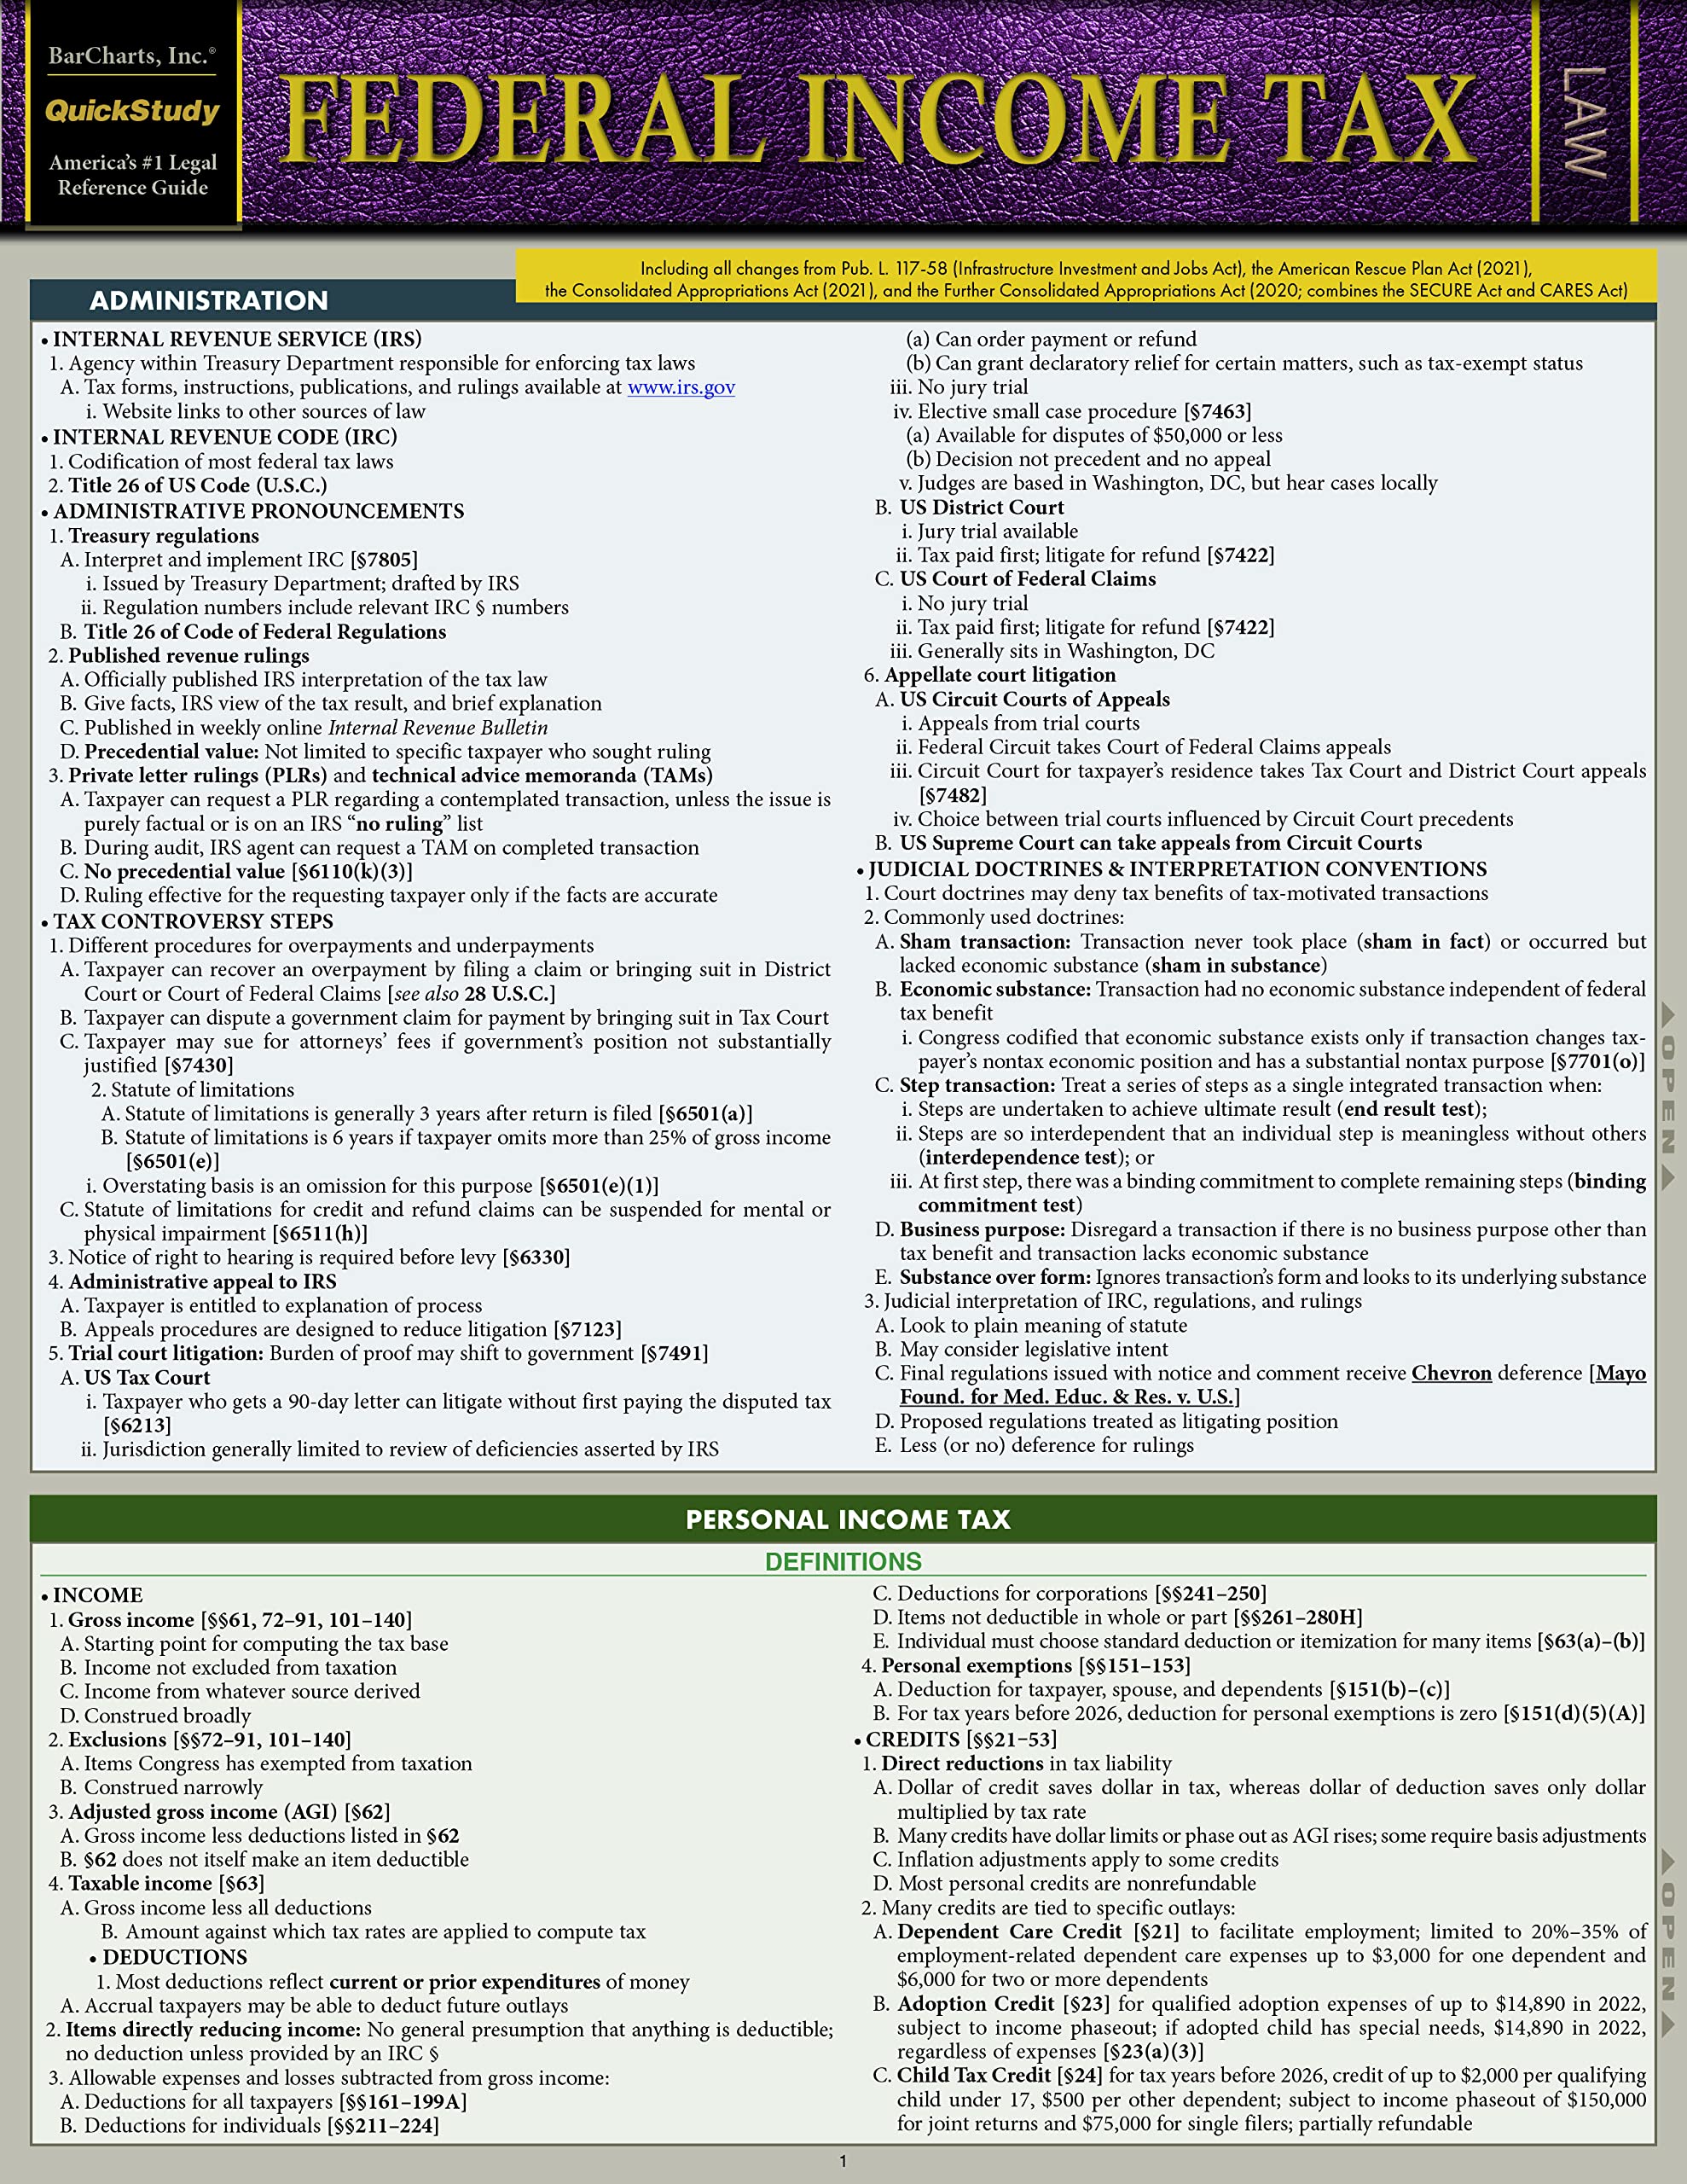 Federal Income Tax: a Quickstudy Laminated Law Guide (BAR Exam)